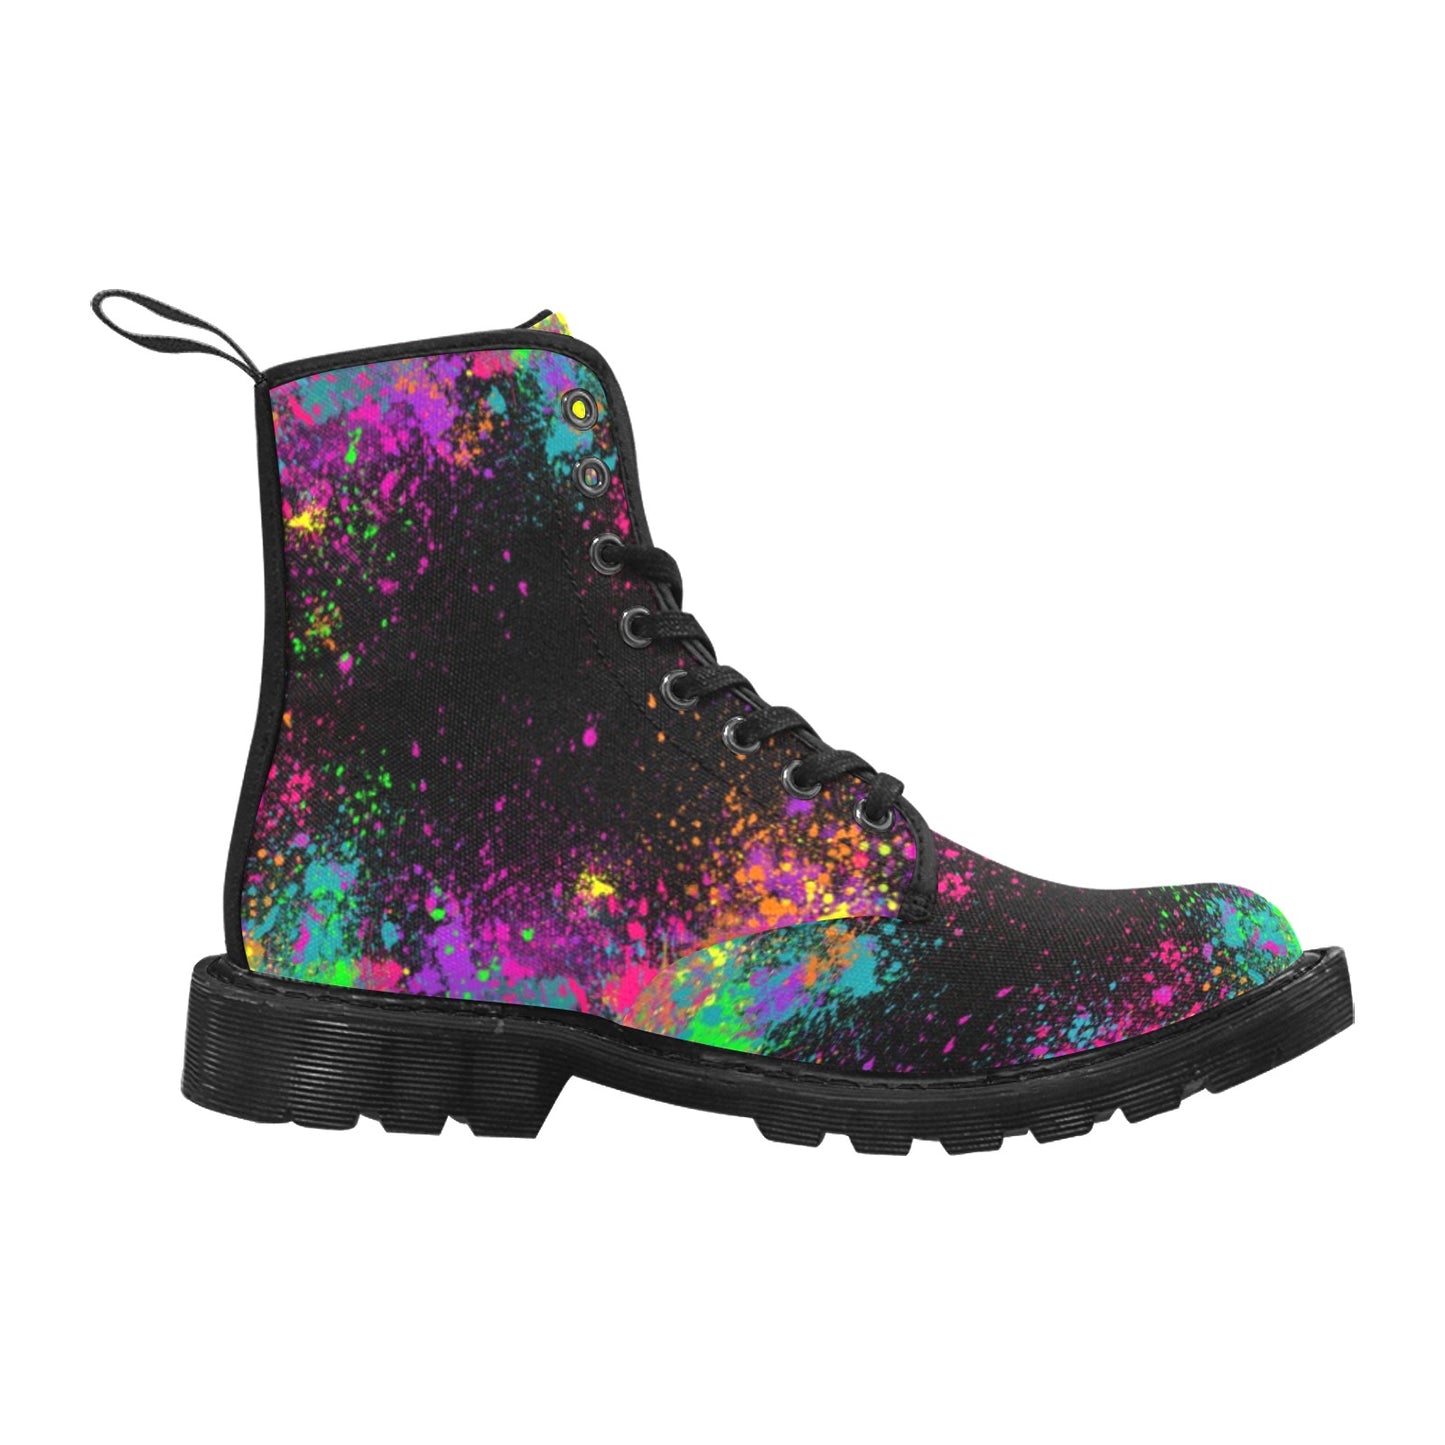 Durable and stylish paint splatter boots